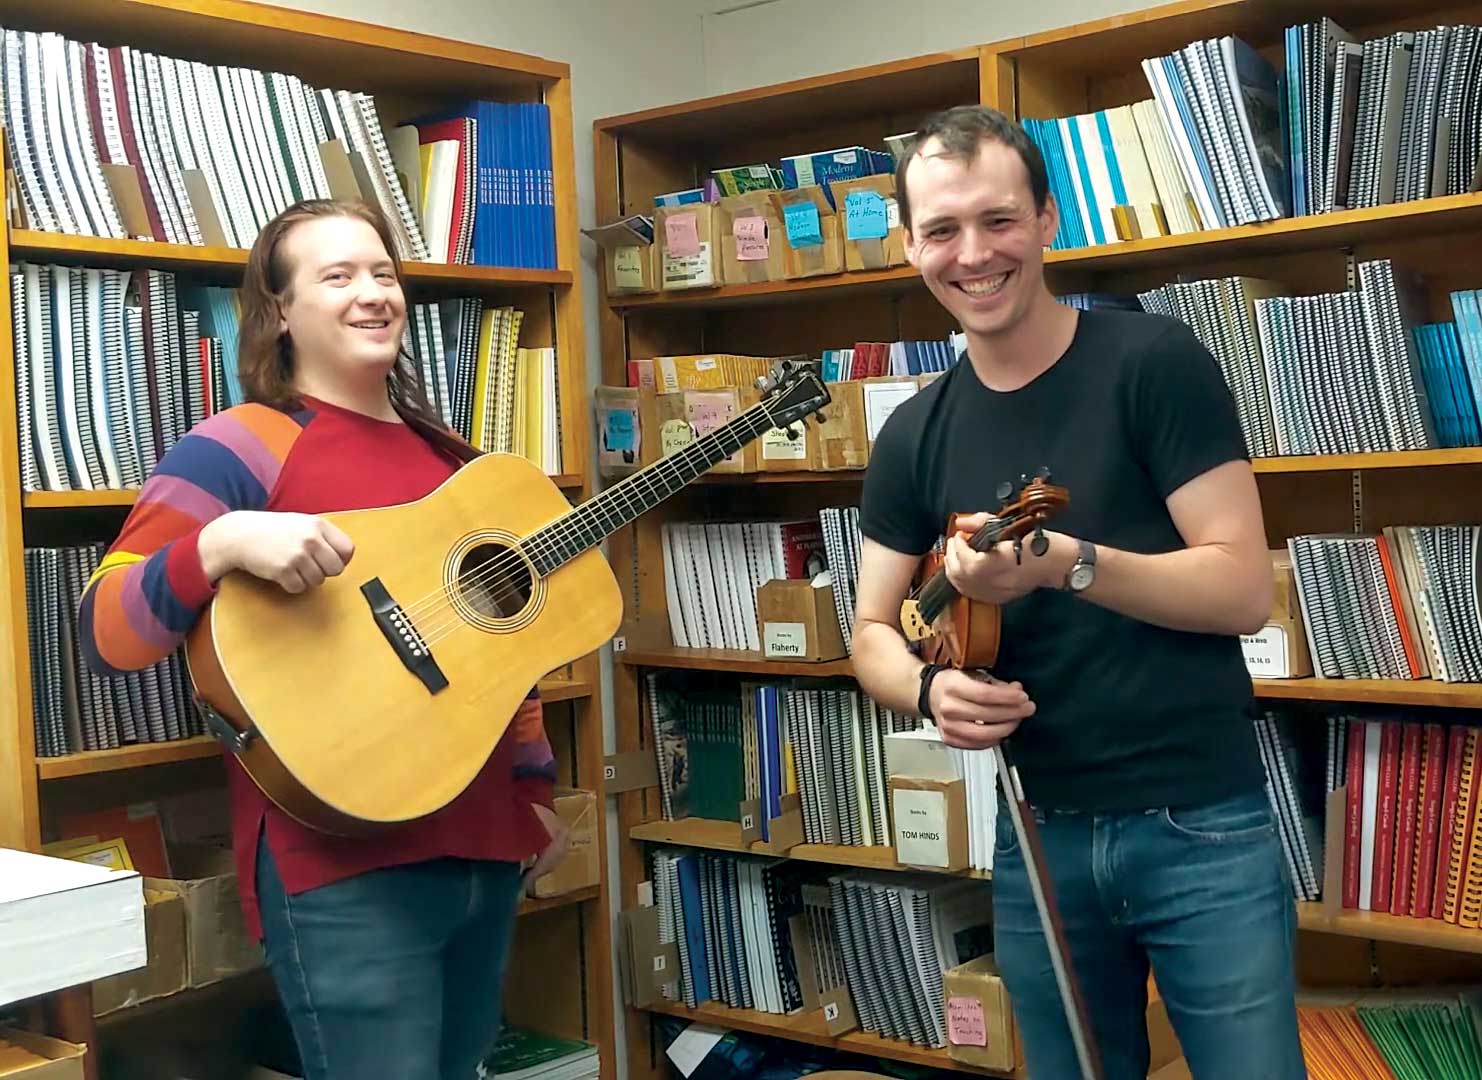 Brian Lindsay and Alex Sturbaum playing guitar and fiddle in the CDSS store room